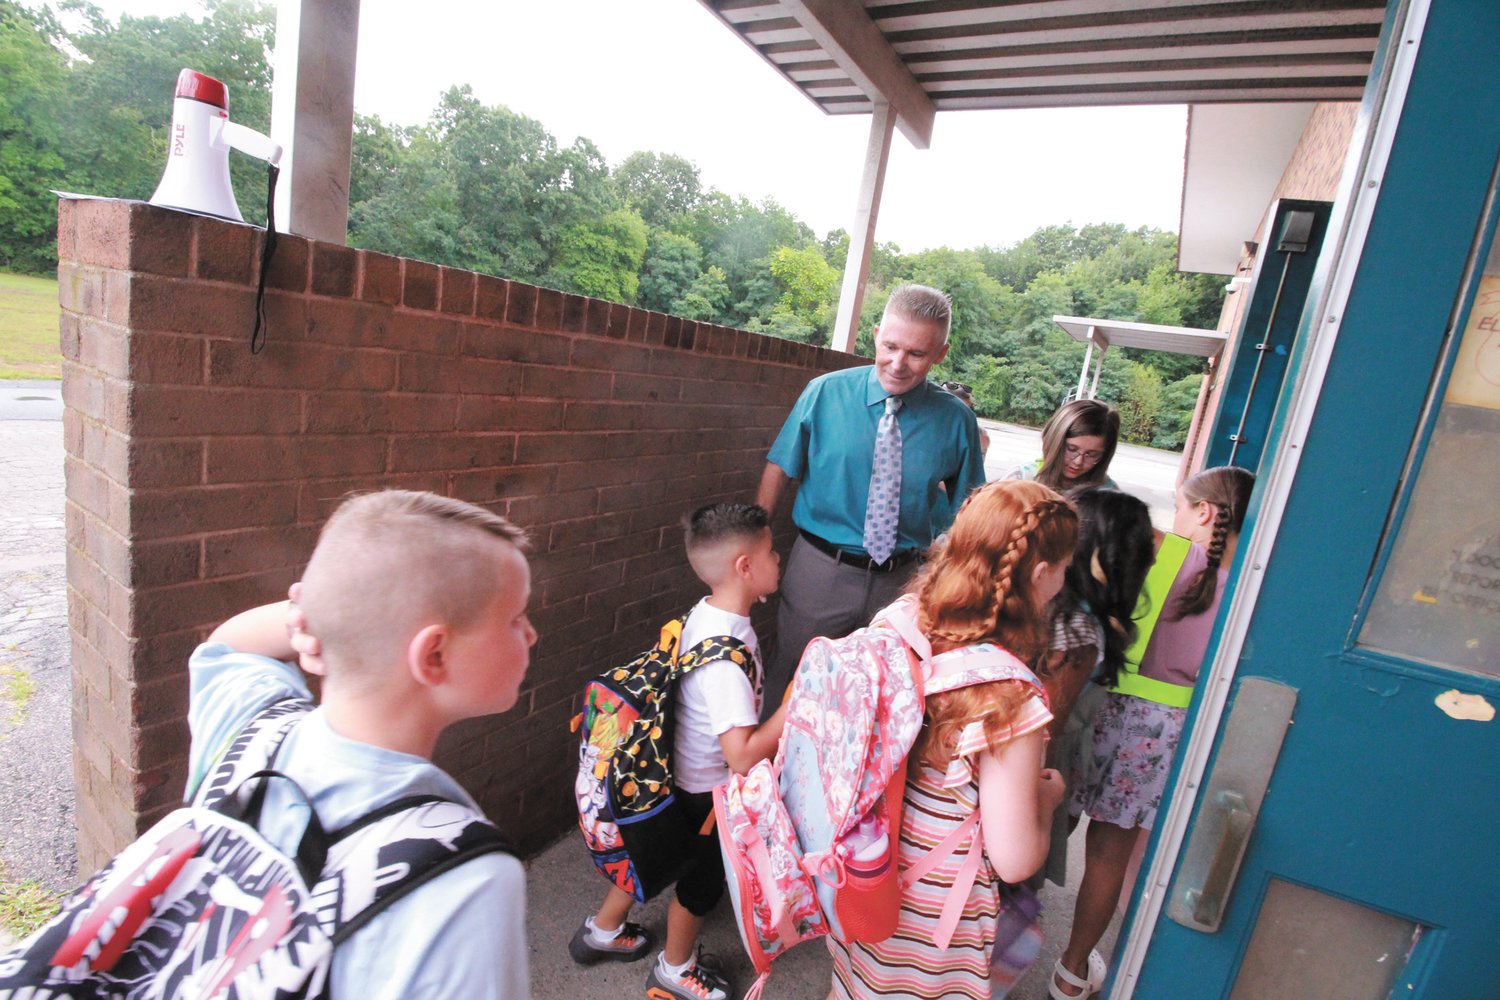 THERE TO GREET THEM: Hoxsie principal Gary McCoombs welcomes students back to school. The lifting of Covid restrictions enabled all the students with the exception of kindergartners to assemble in the all-purpose room.